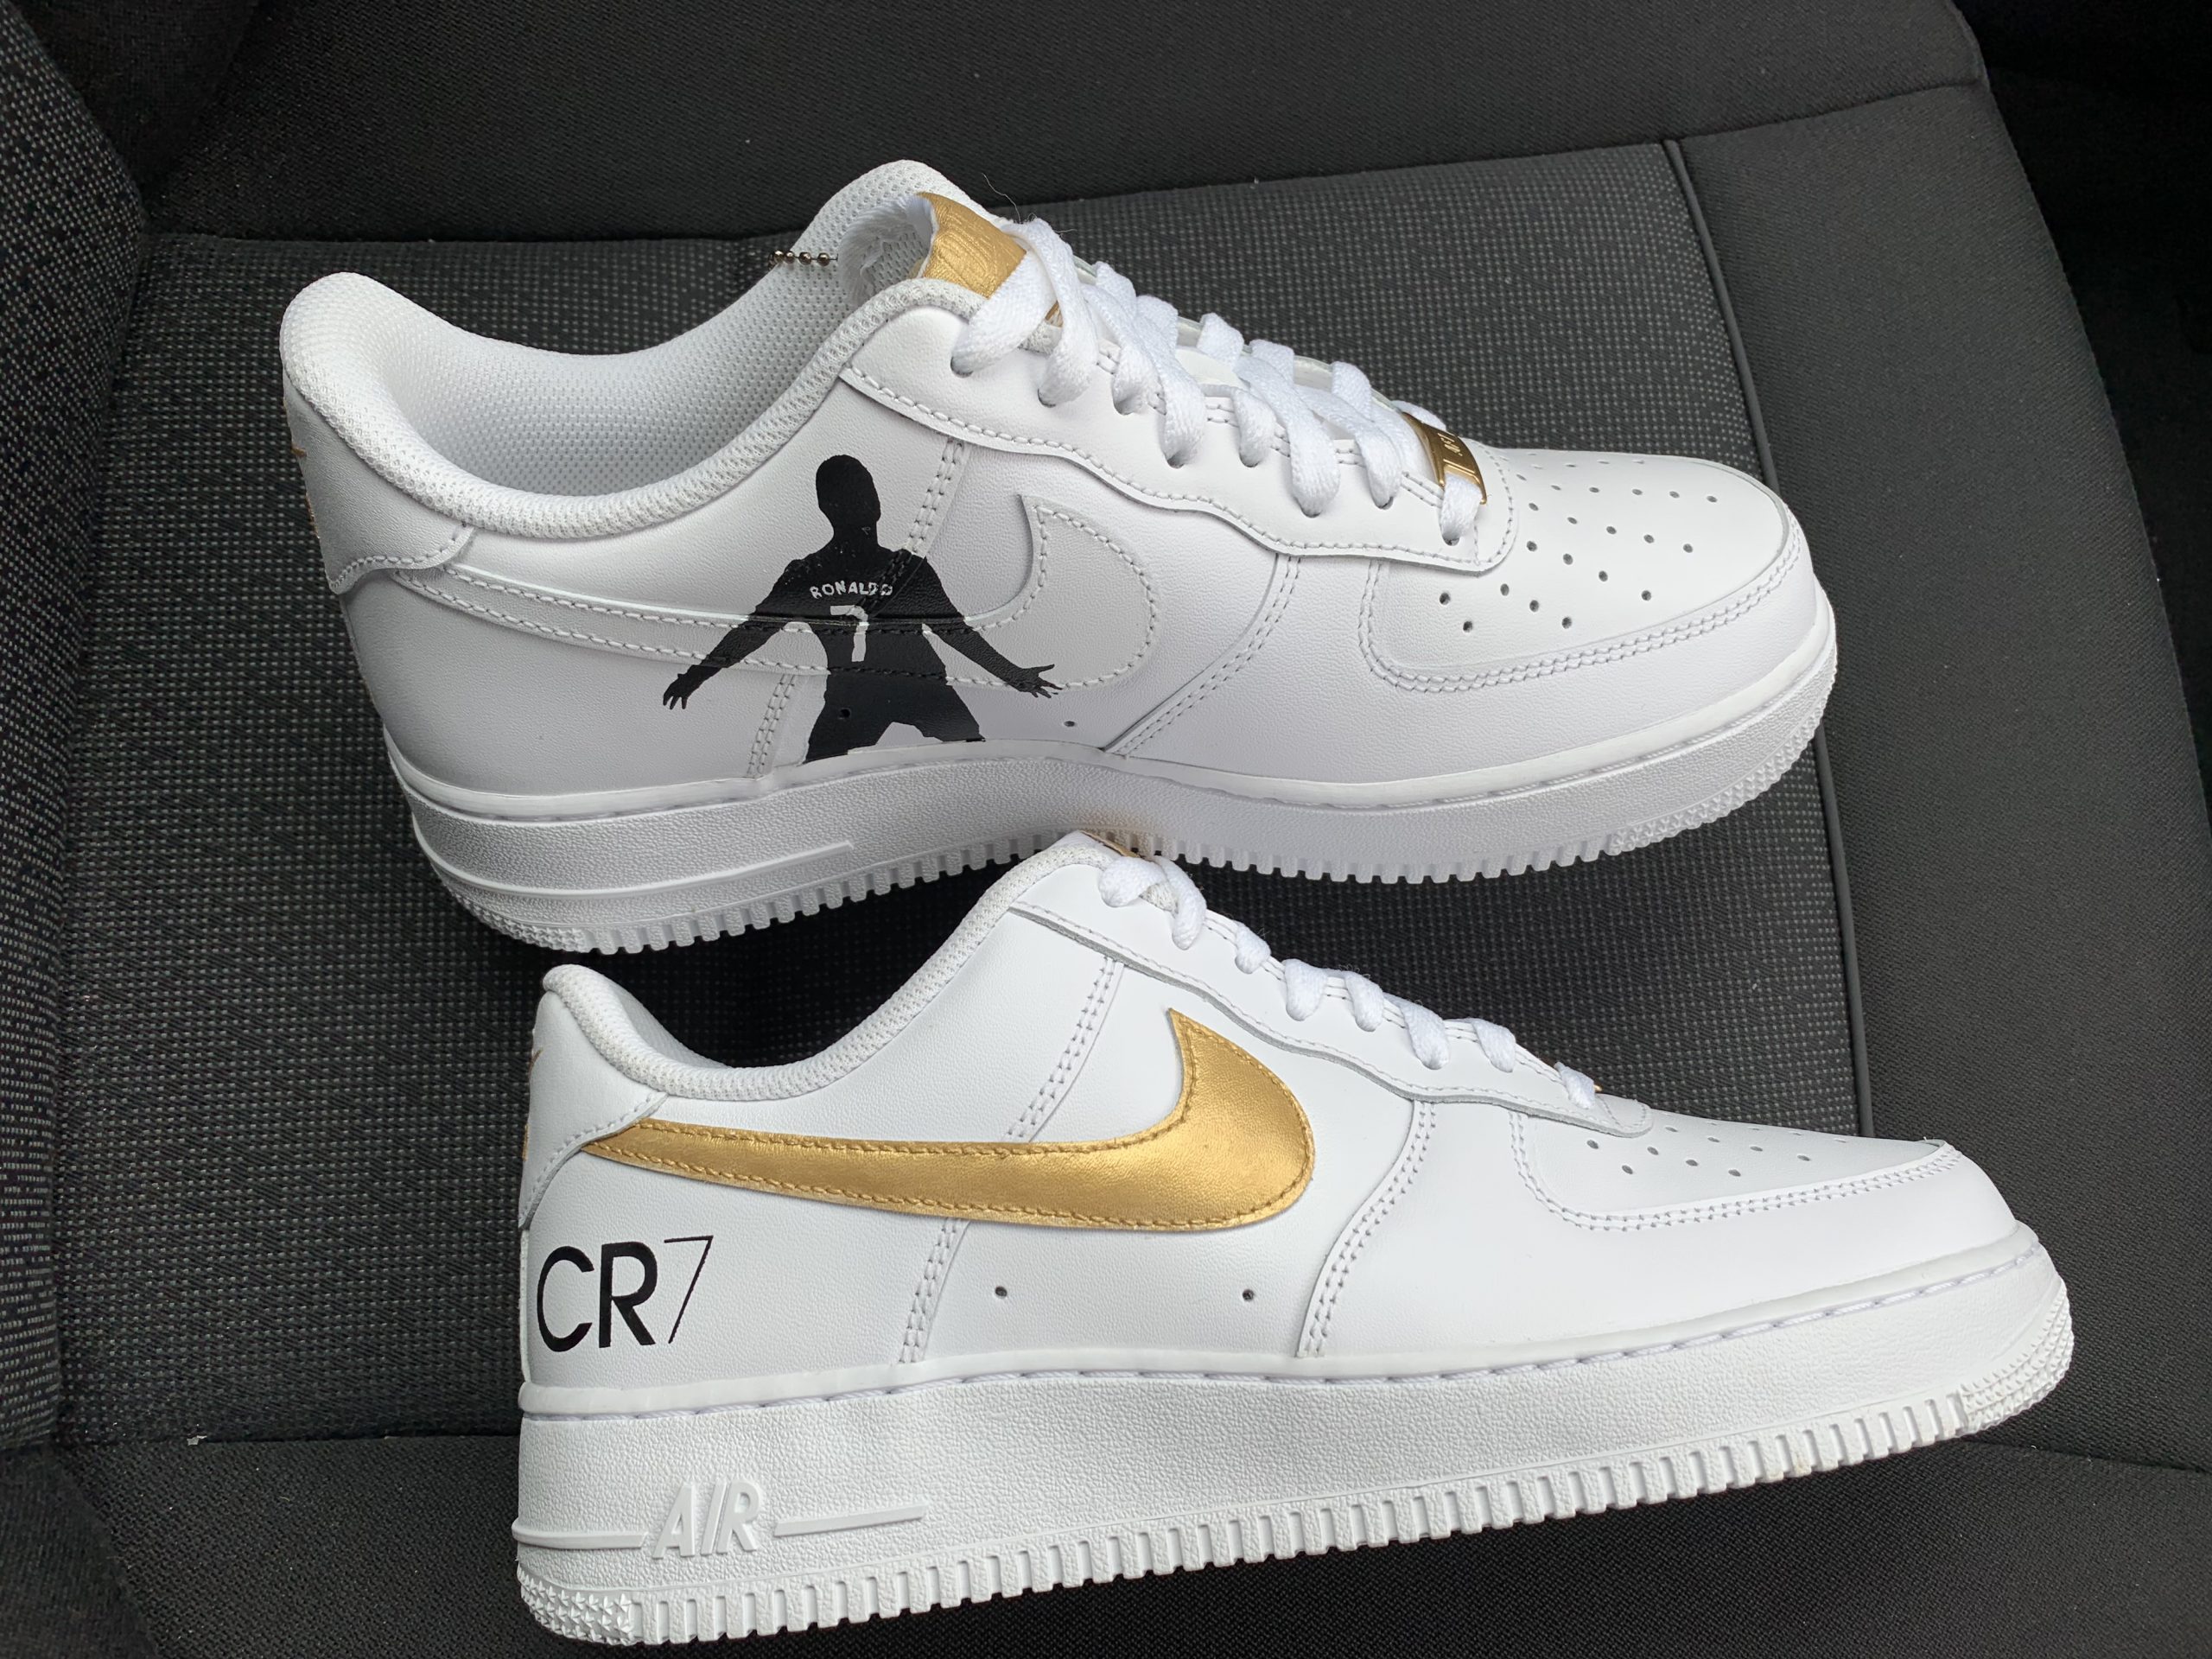 costumized airforces